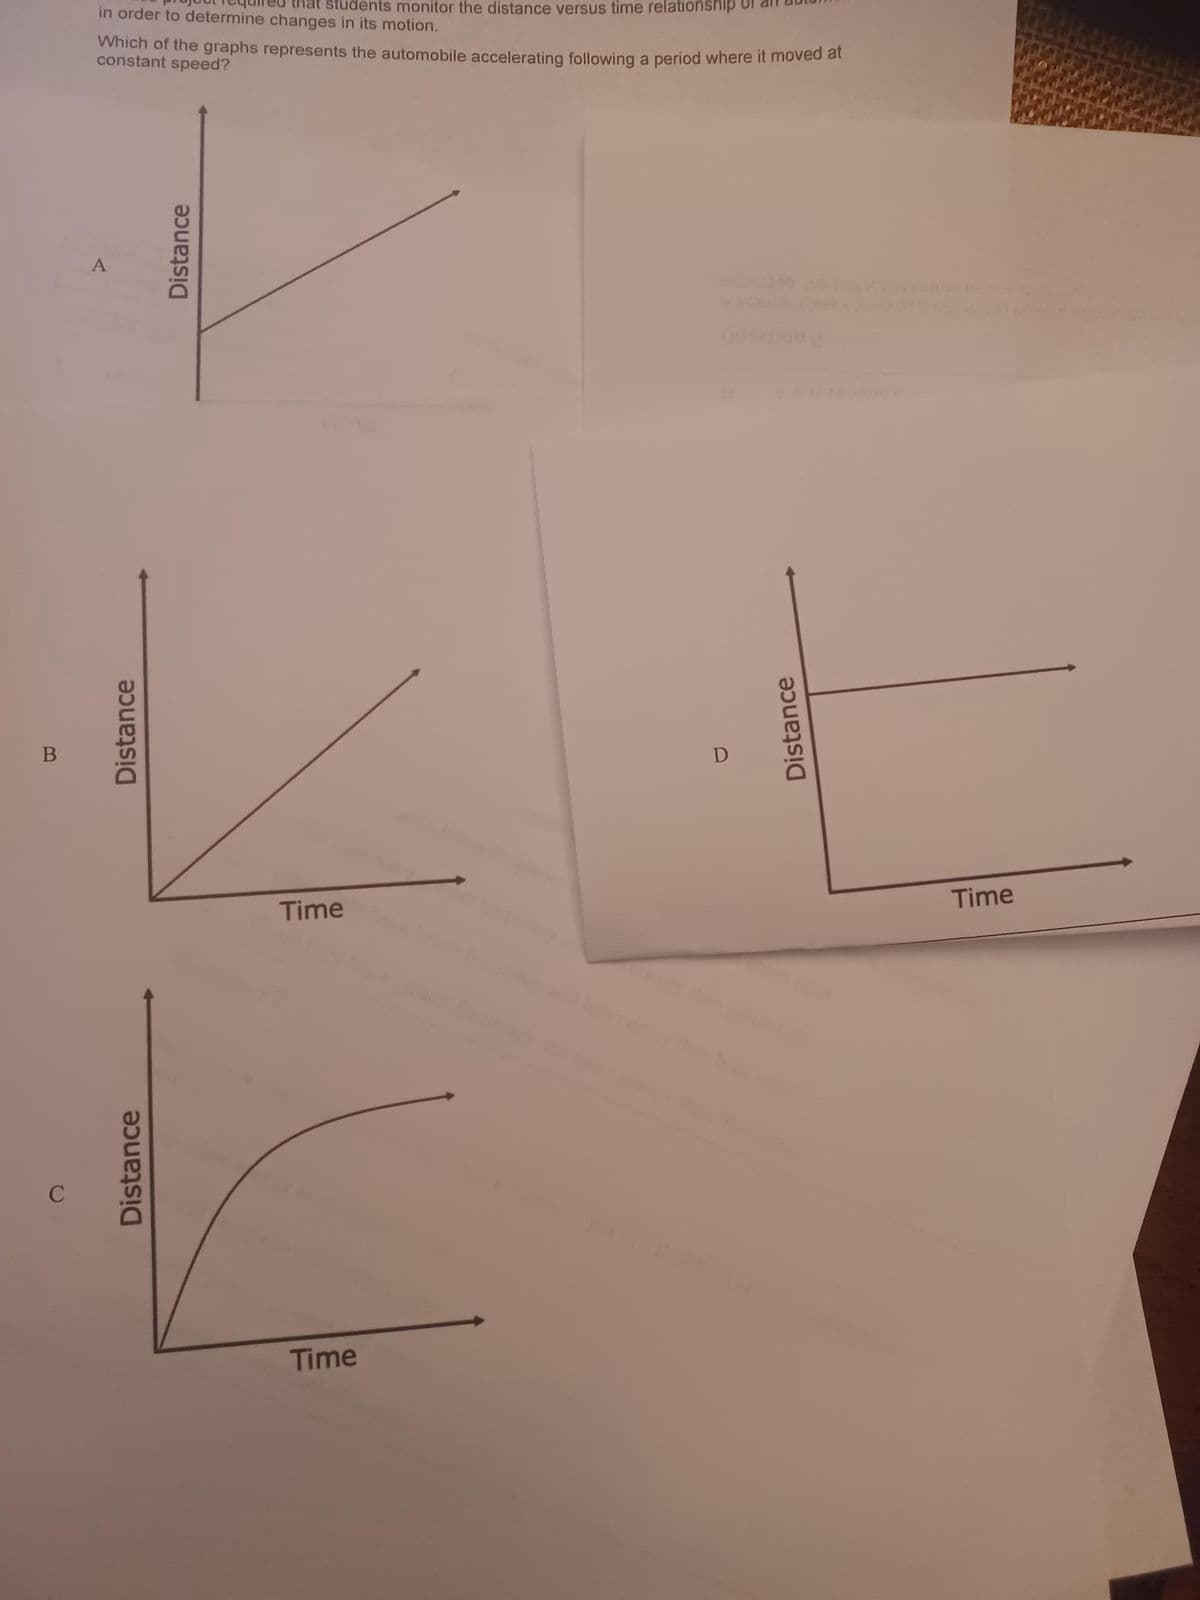 B
C
in order to determine changes in its motion.
Which of the graphs represents the automobile accelerating following a period where it moved at
constant speed?
Distance
students monitor the distance versus time relationship
Distance
Distance
Time
Time
Distance
Time